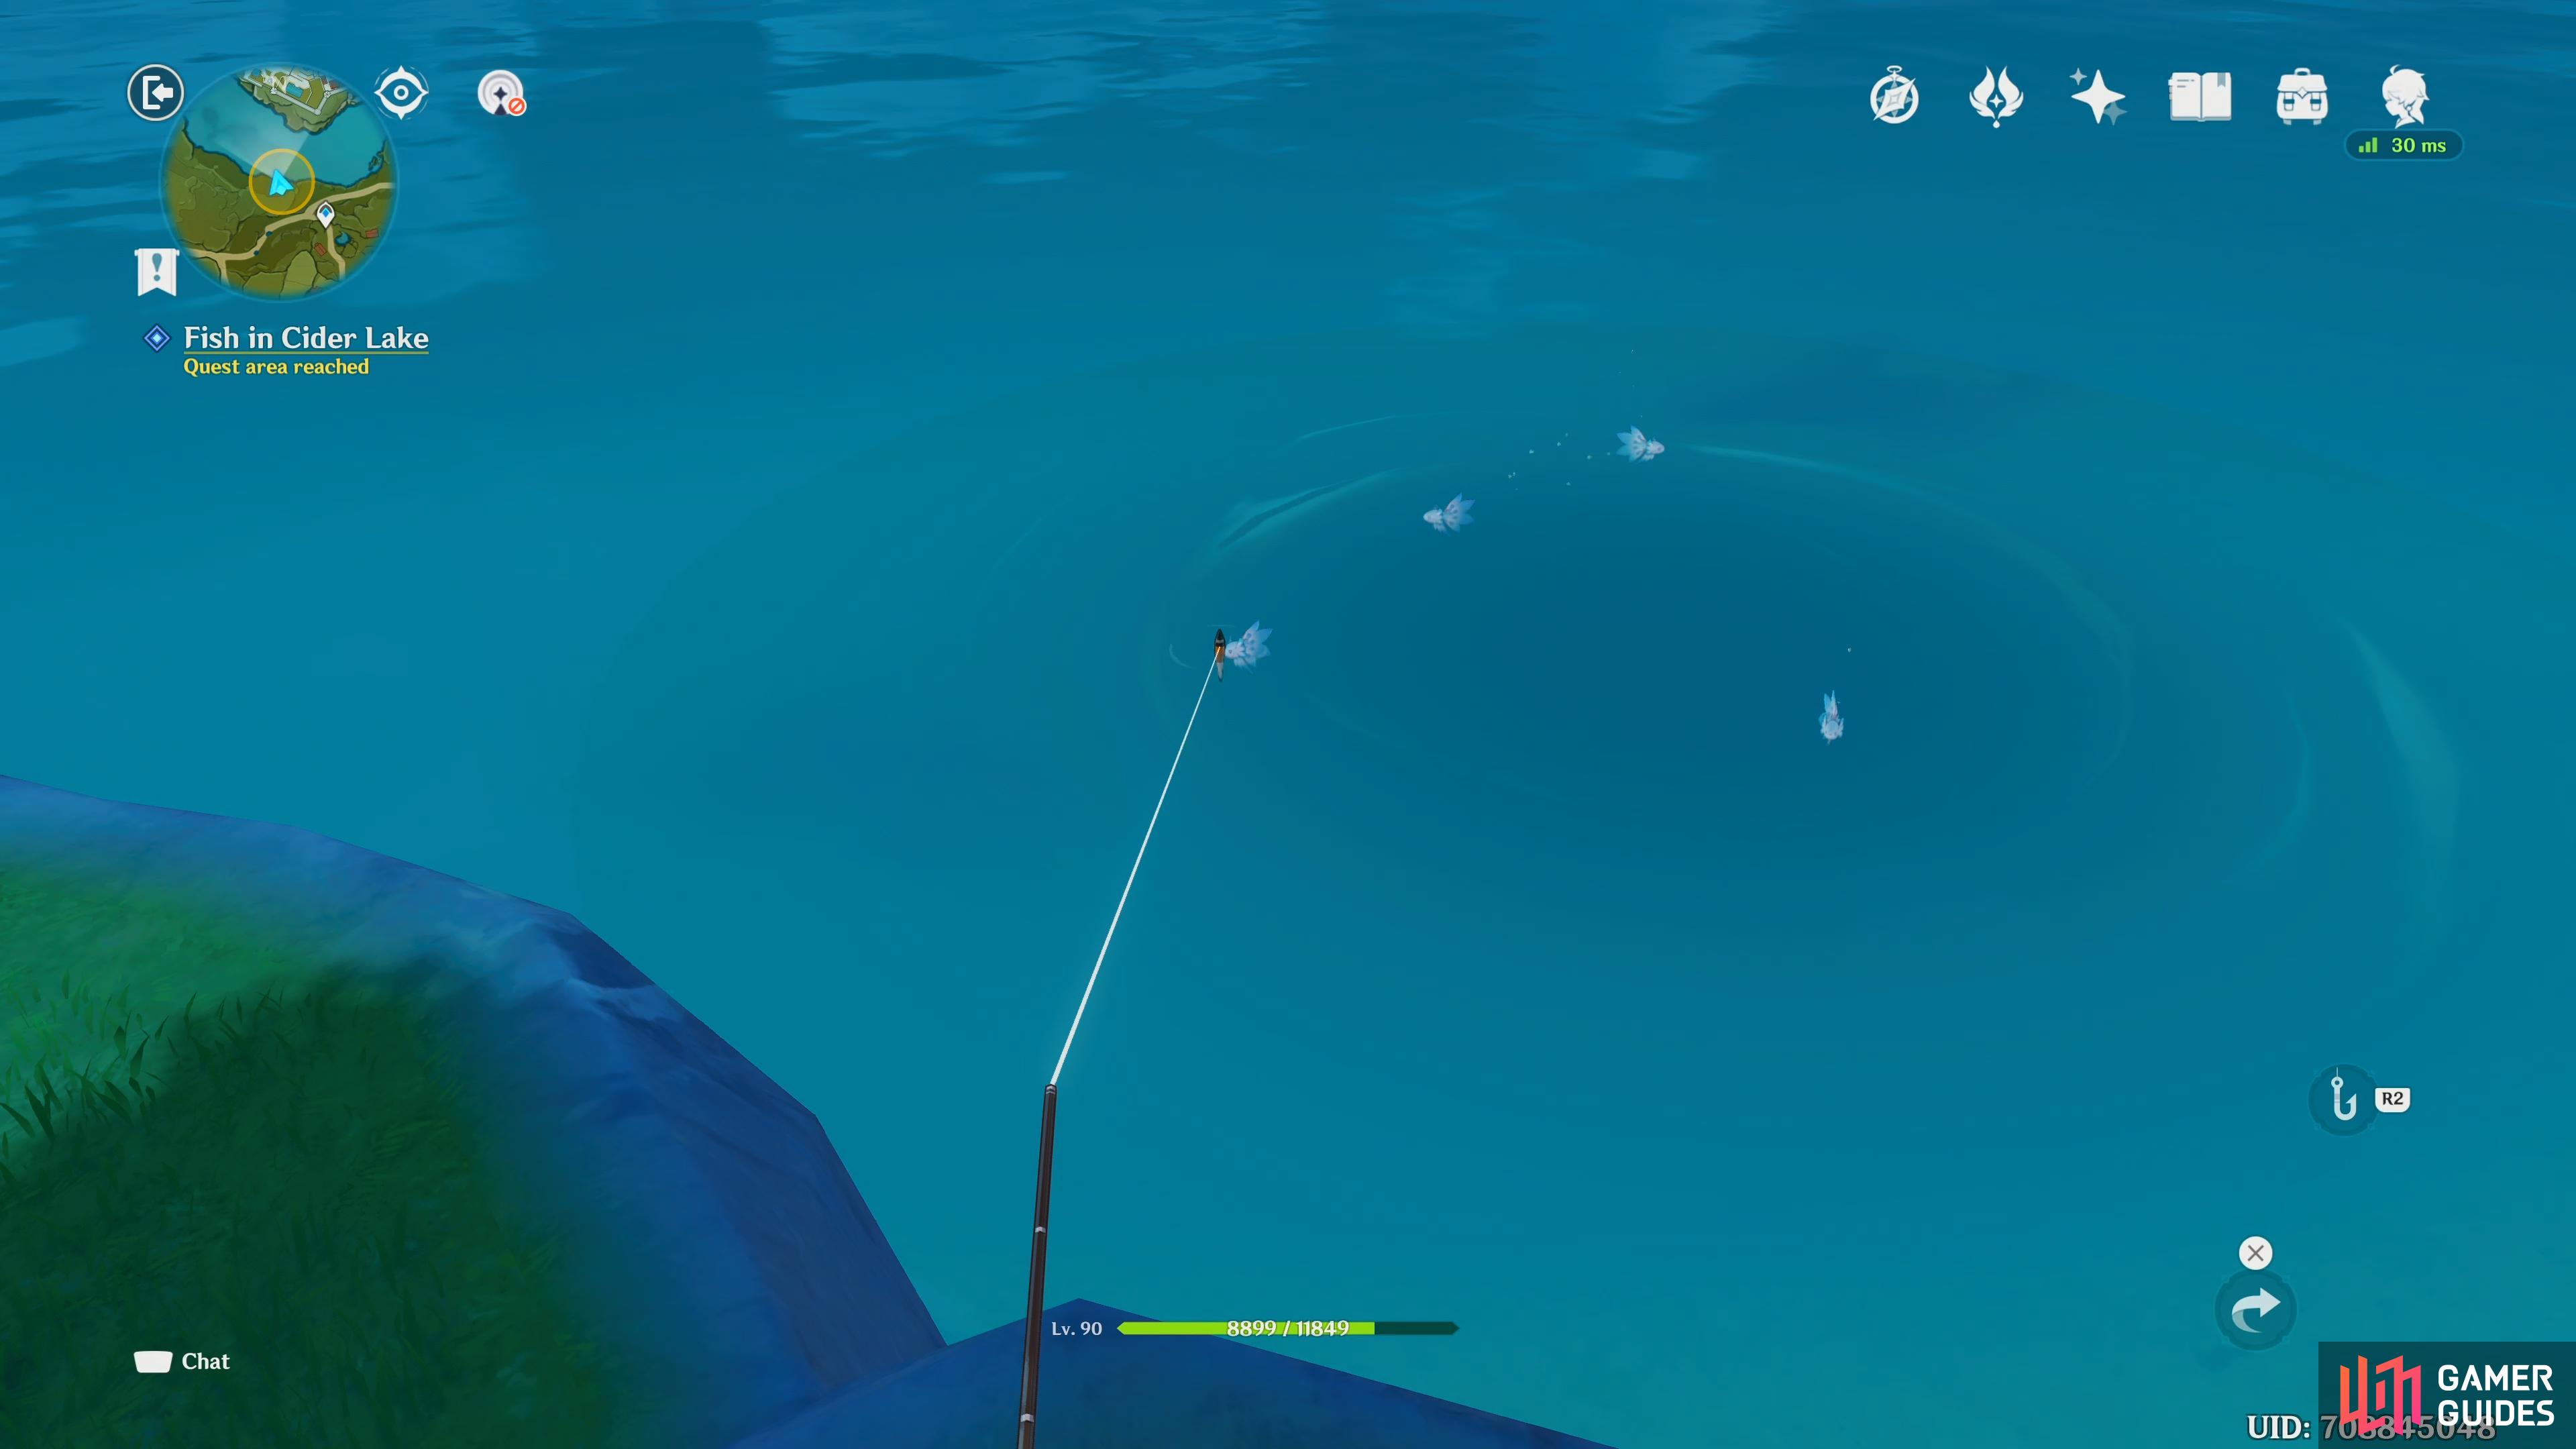 The fish will bite a few times before it is on the hook, be patient until you see the text appear.